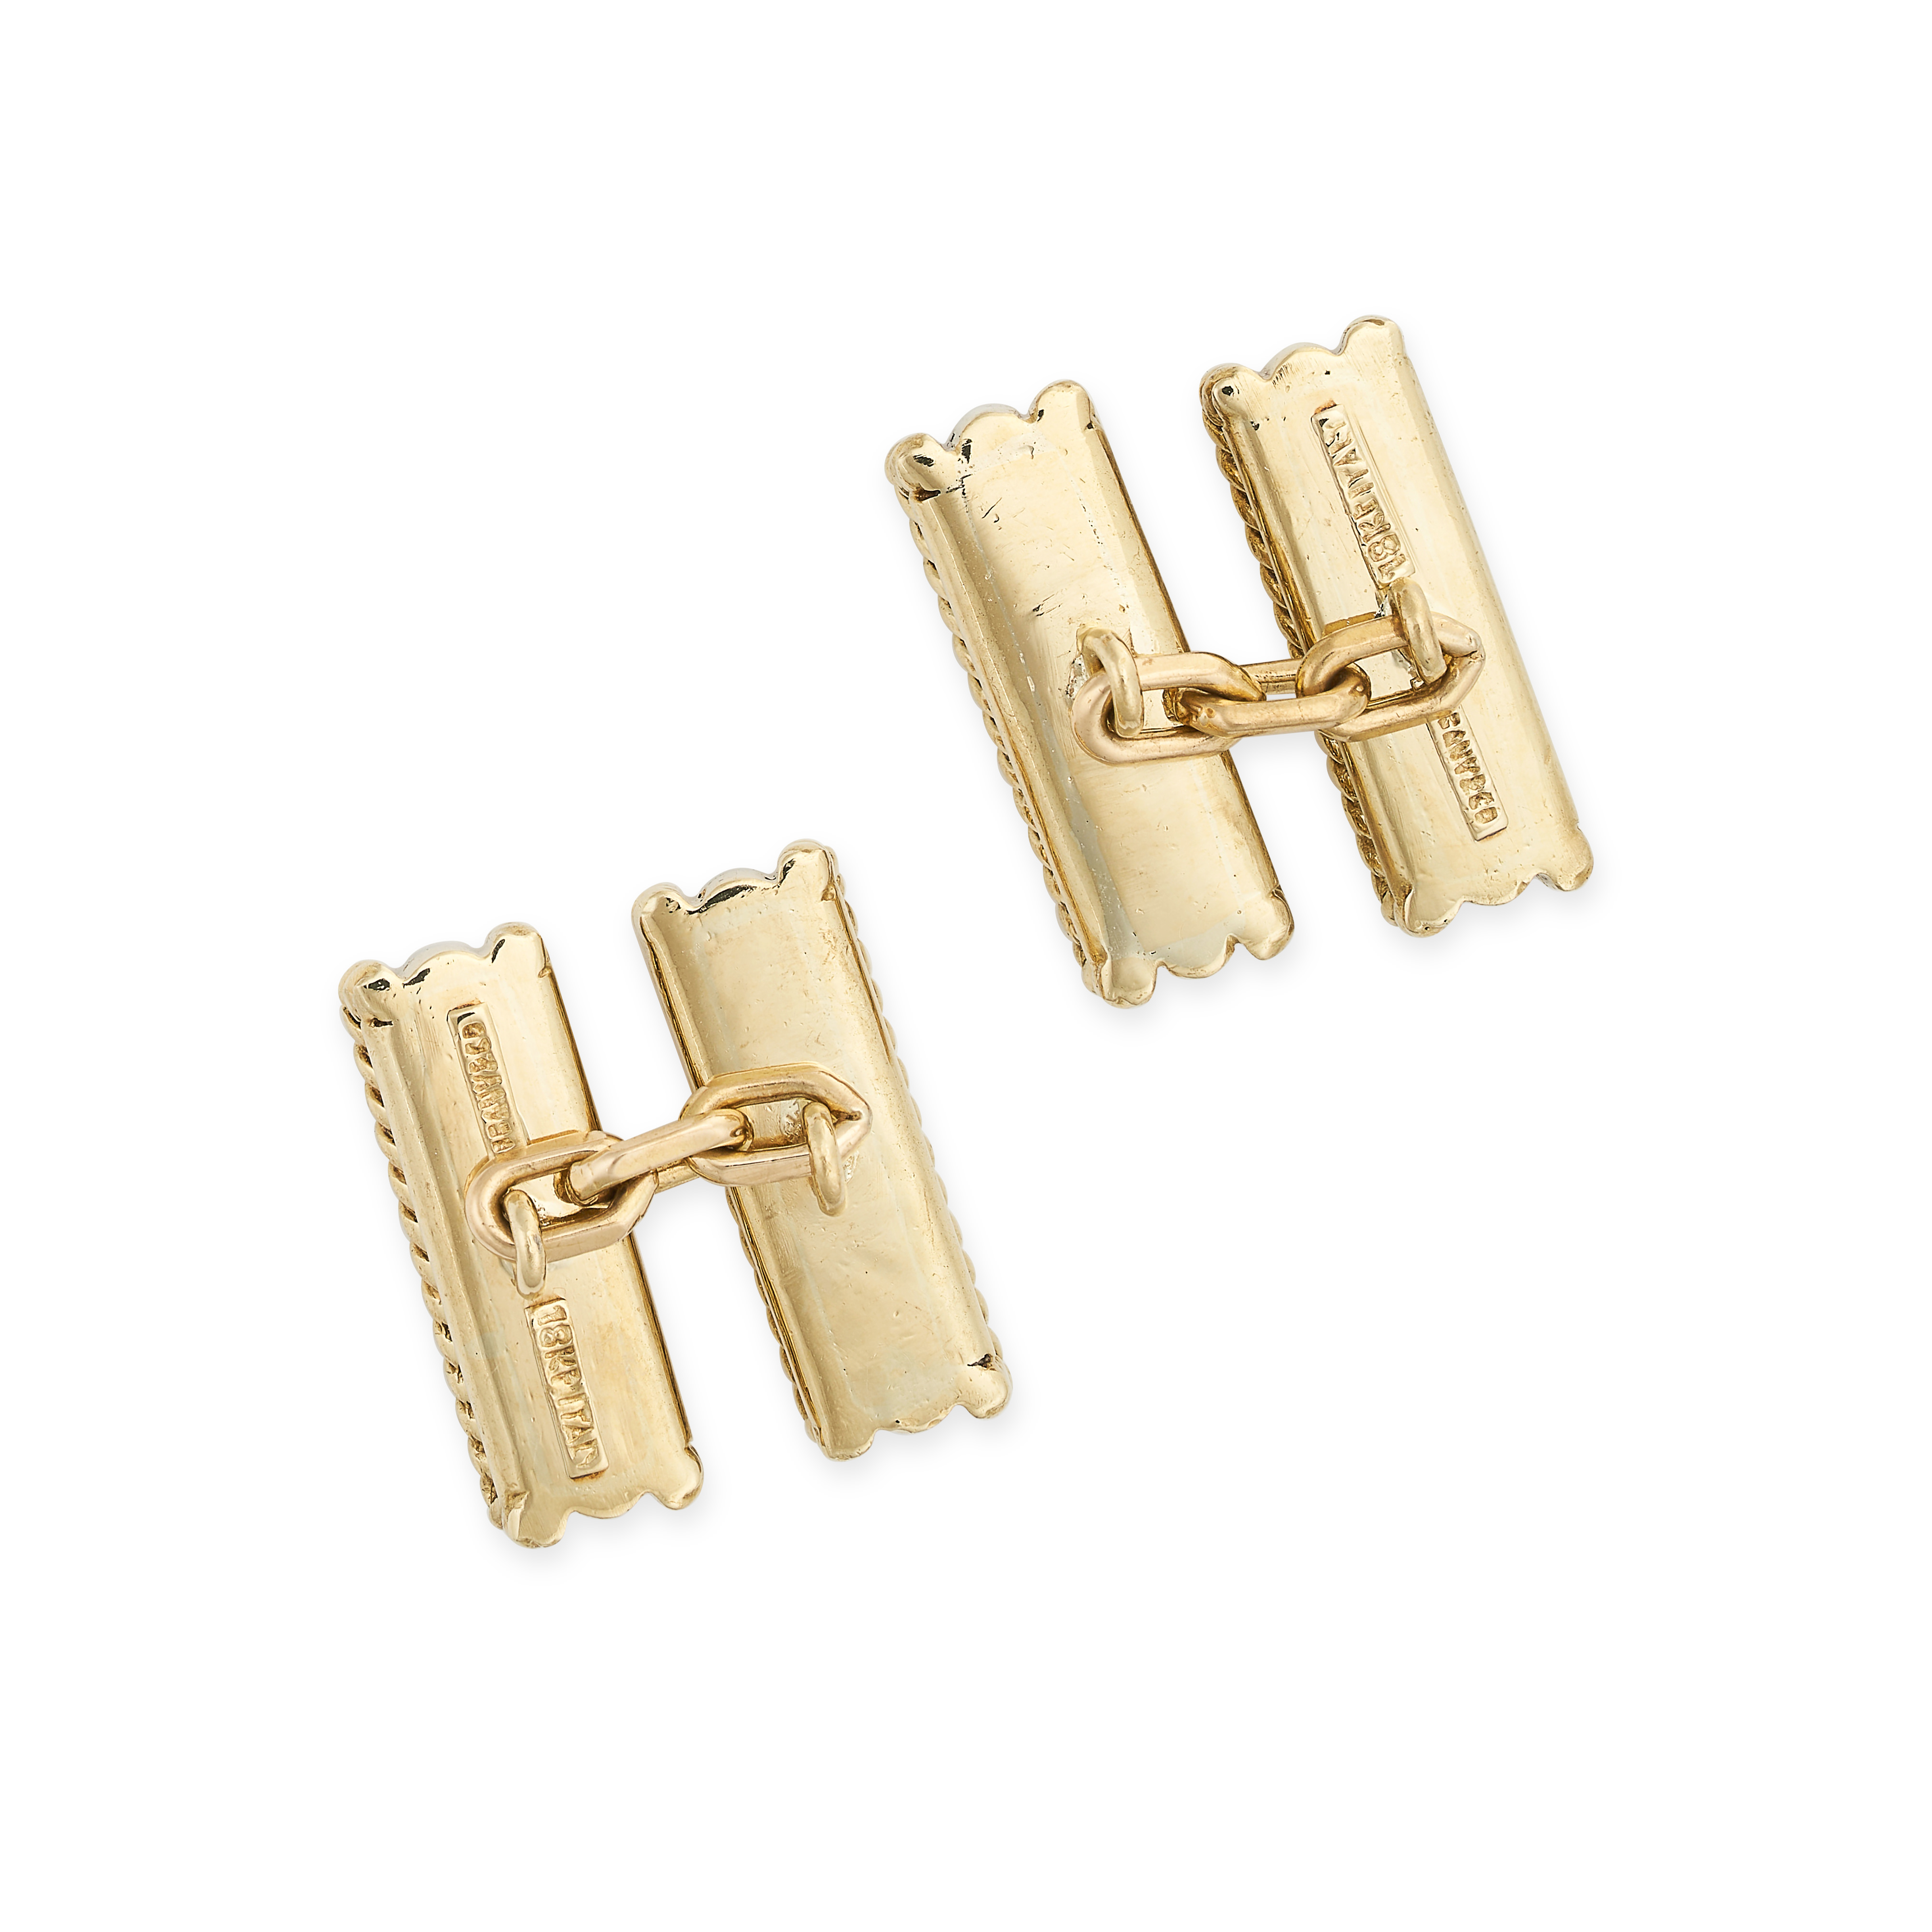 TIFFANY & CO, A PAIR OF DIAMOND CUFFLINKS in 18ct yellow gold and white gold, each formed of two - Image 2 of 2